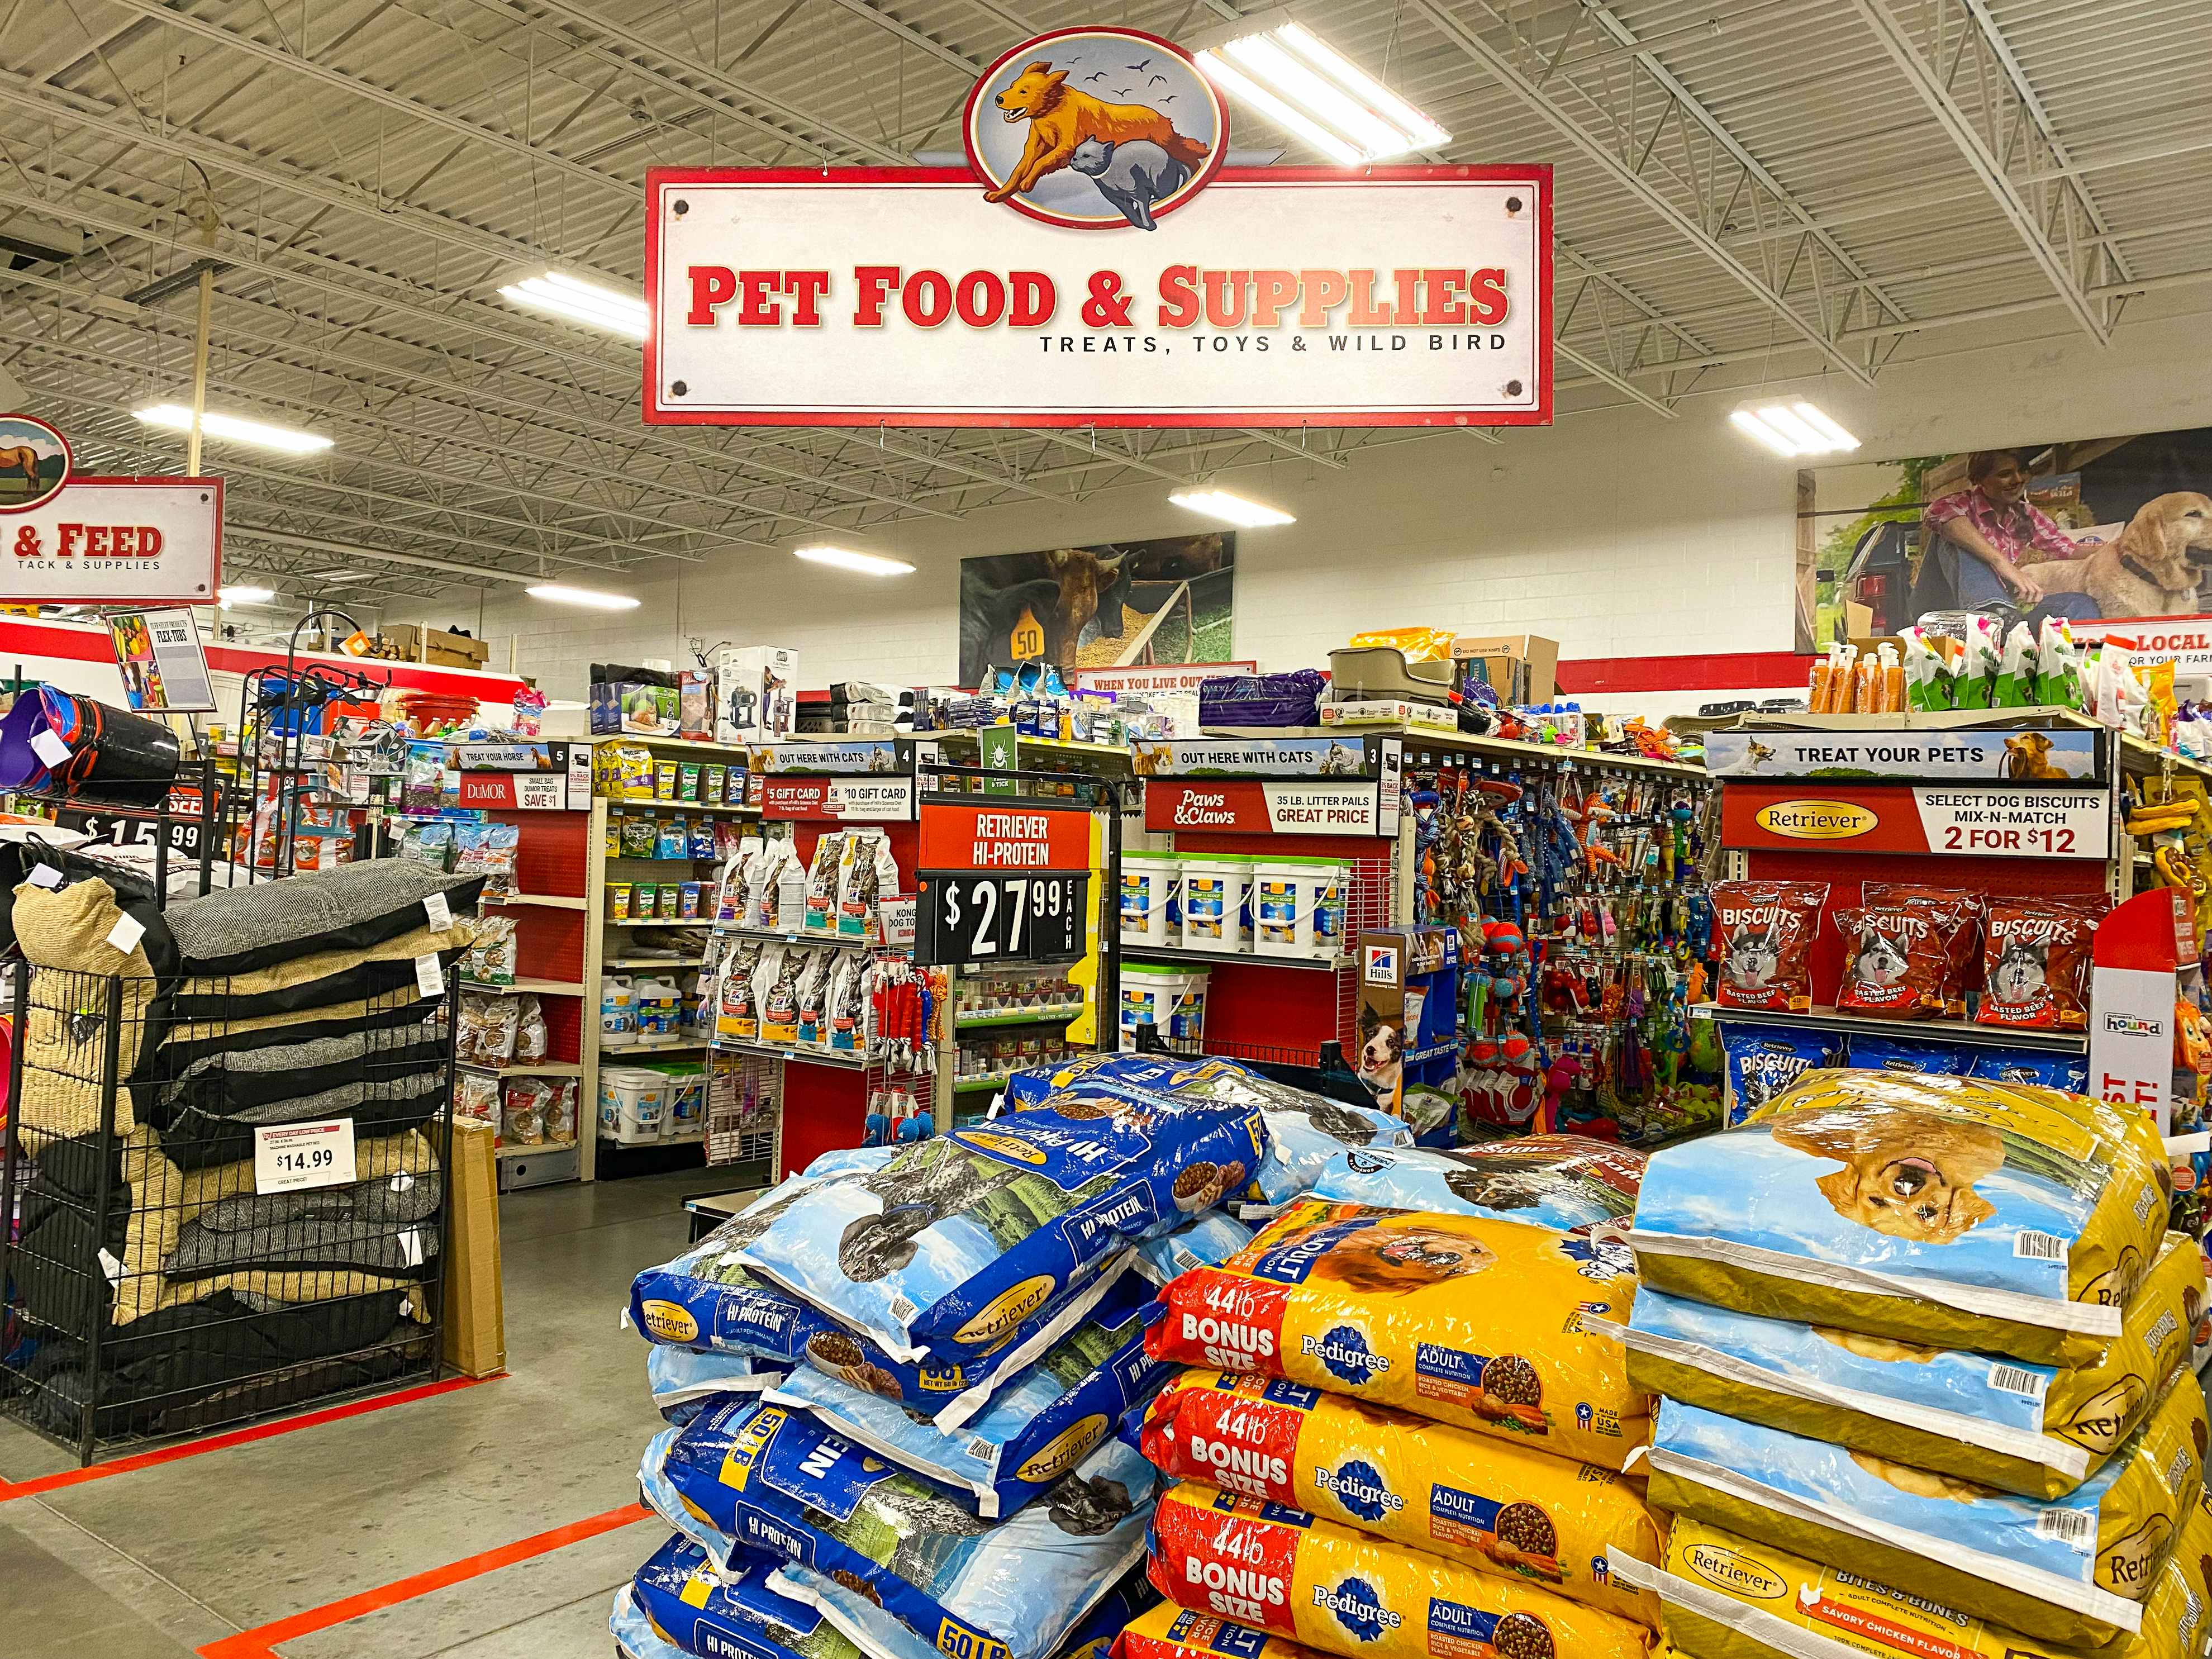 The Pet Food and Supplies section with a large sign.